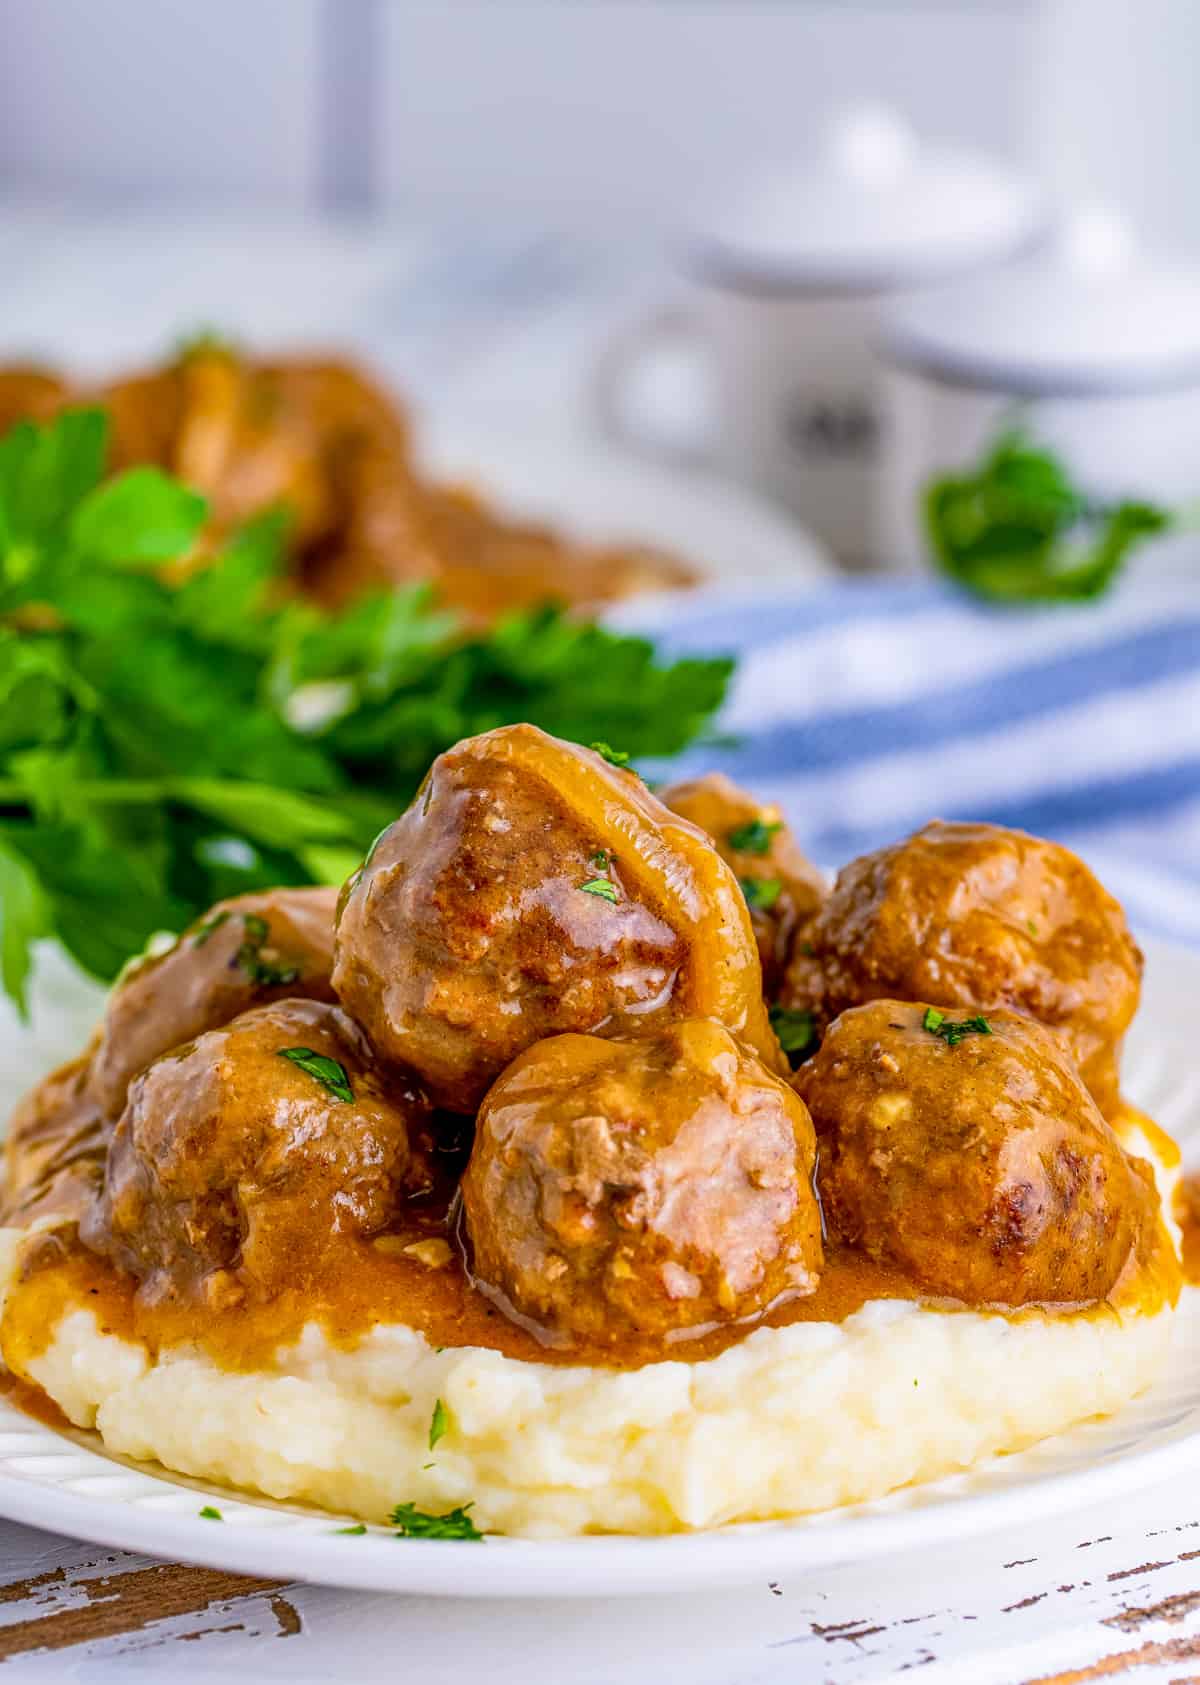 Meatballs with Gravy served over mashed potatoes on plate.